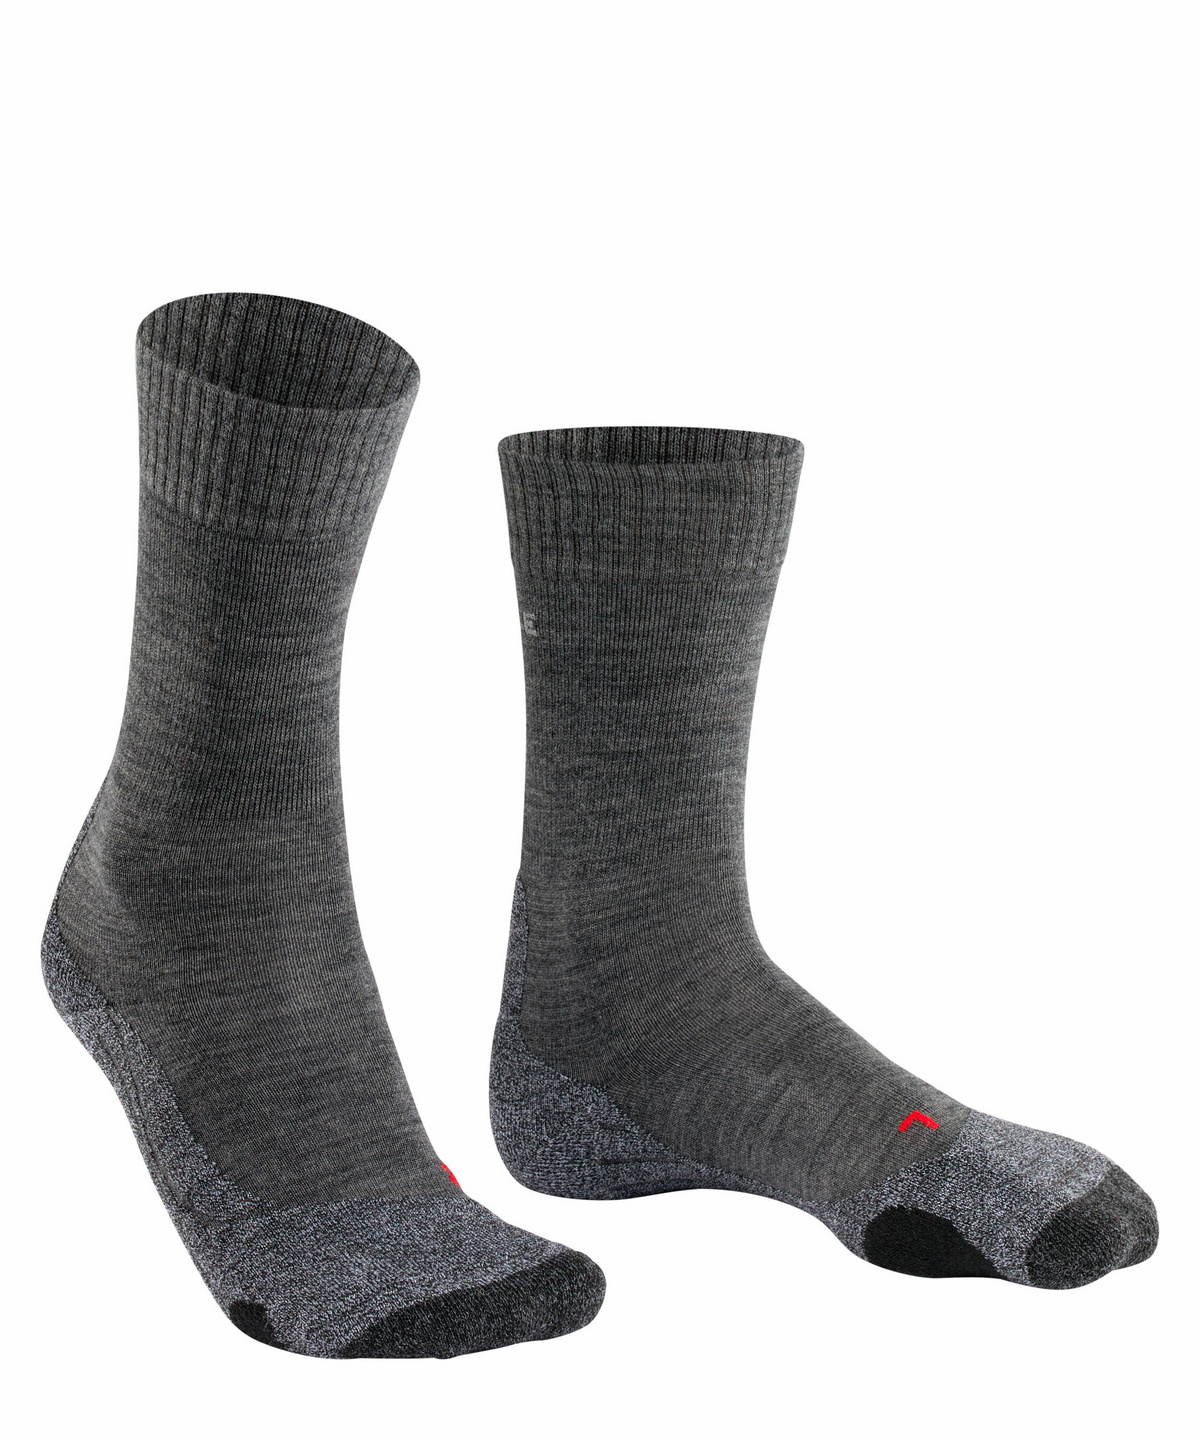 FALKE Mens TK2 Wool Hiking Socks Merino Grey More Colours Thermal Thick Midweight Padded Cushioned Sole Breathable Quick Dry Anti Blister Outdoor Walking Sock 1 Pair